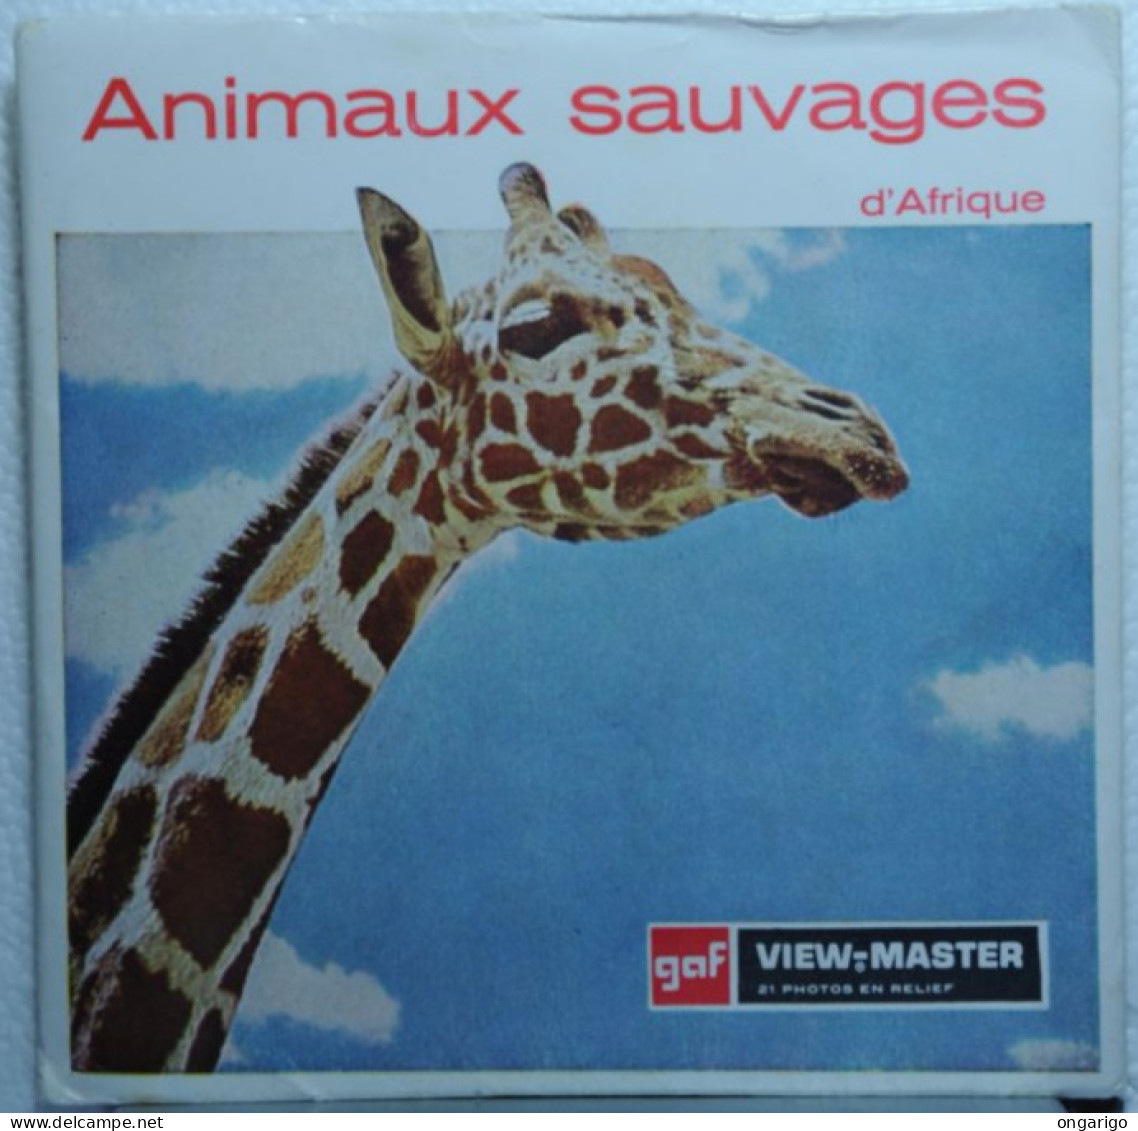 VIEW MASTER  ;  B 618    ANIMAUX SAUVAGES D'ARIQUE   :  POCHETTE DE 3 DISQUES - Stereoscopes - Side-by-side Viewers